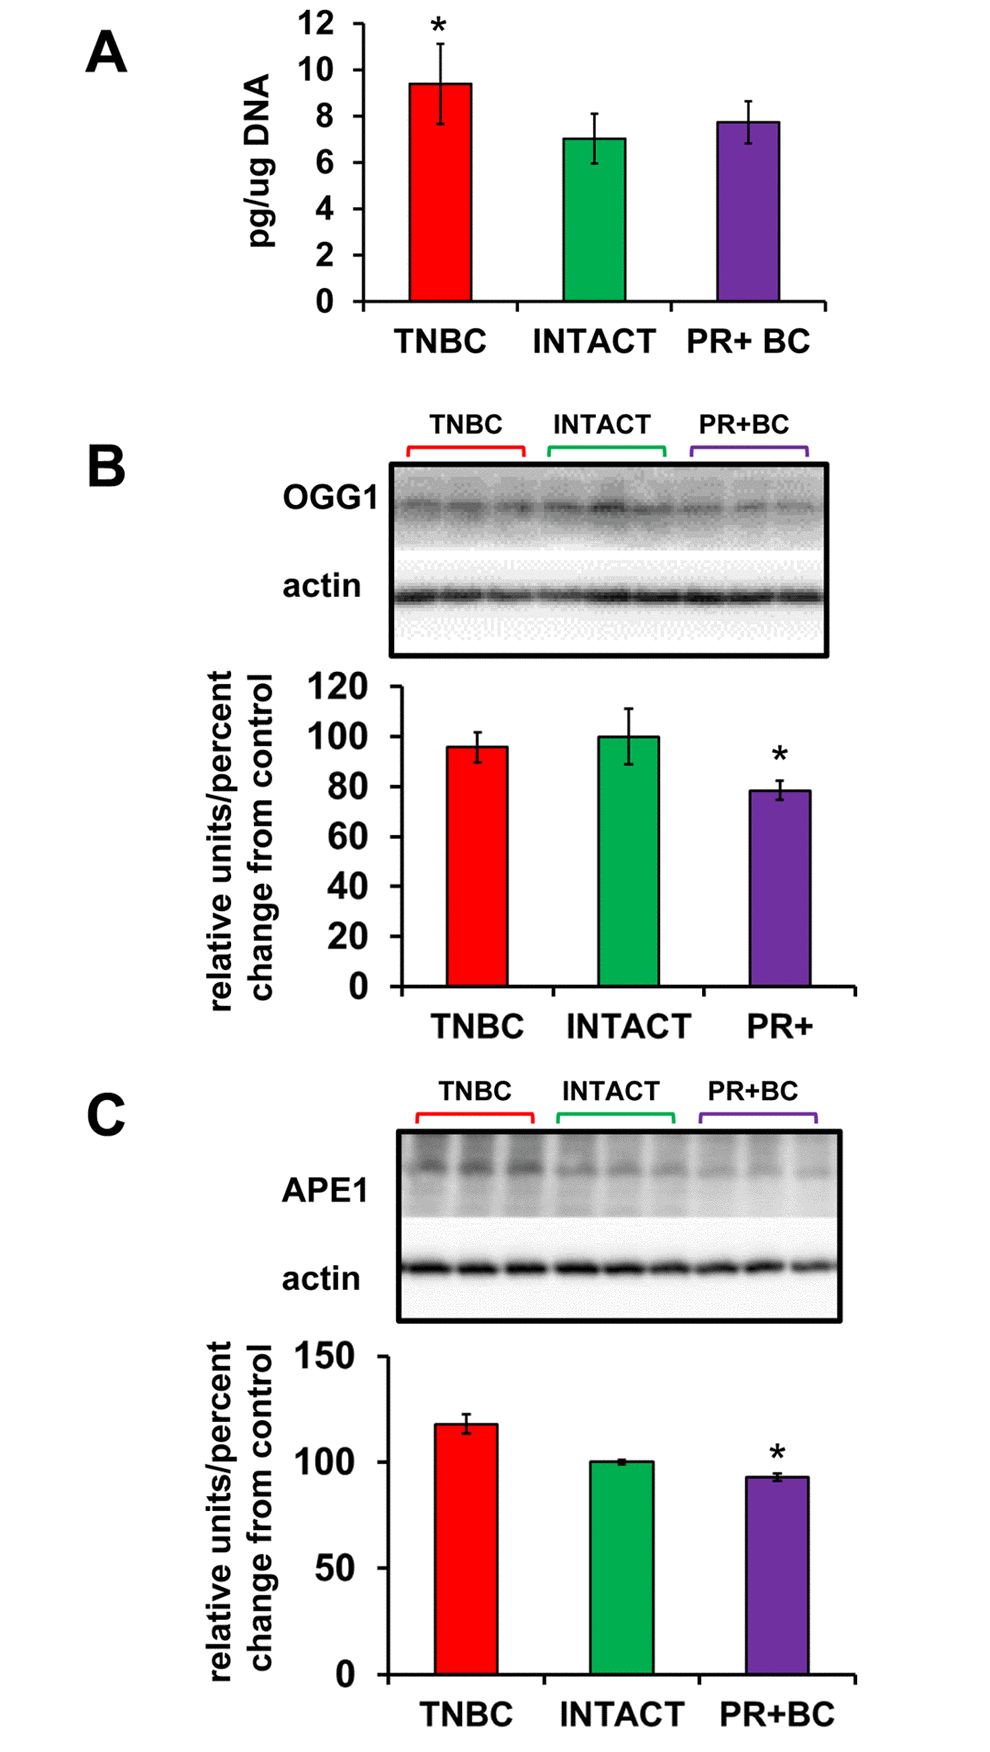 Oxidative DNA damage in PFC tissues of intact and TNBC and PR+BC-bearing TumorGraft mice. (A) Levels of 8-oxo-7-hydrodeoxyguanosine (8-oxodG) in genomic DNA isolated from PFC tissues (mean ± SD, n=3 for INTACT and PR+BC mice; n=4 for TNBC mice). (B) Western immunoblotting analysis of the base excision repair protein OGG1; data are shown as relative units/percent change of control. Due to protein size differences and scarcity of tissue, membranes were re-used several times. * - significantly different from control mice, p